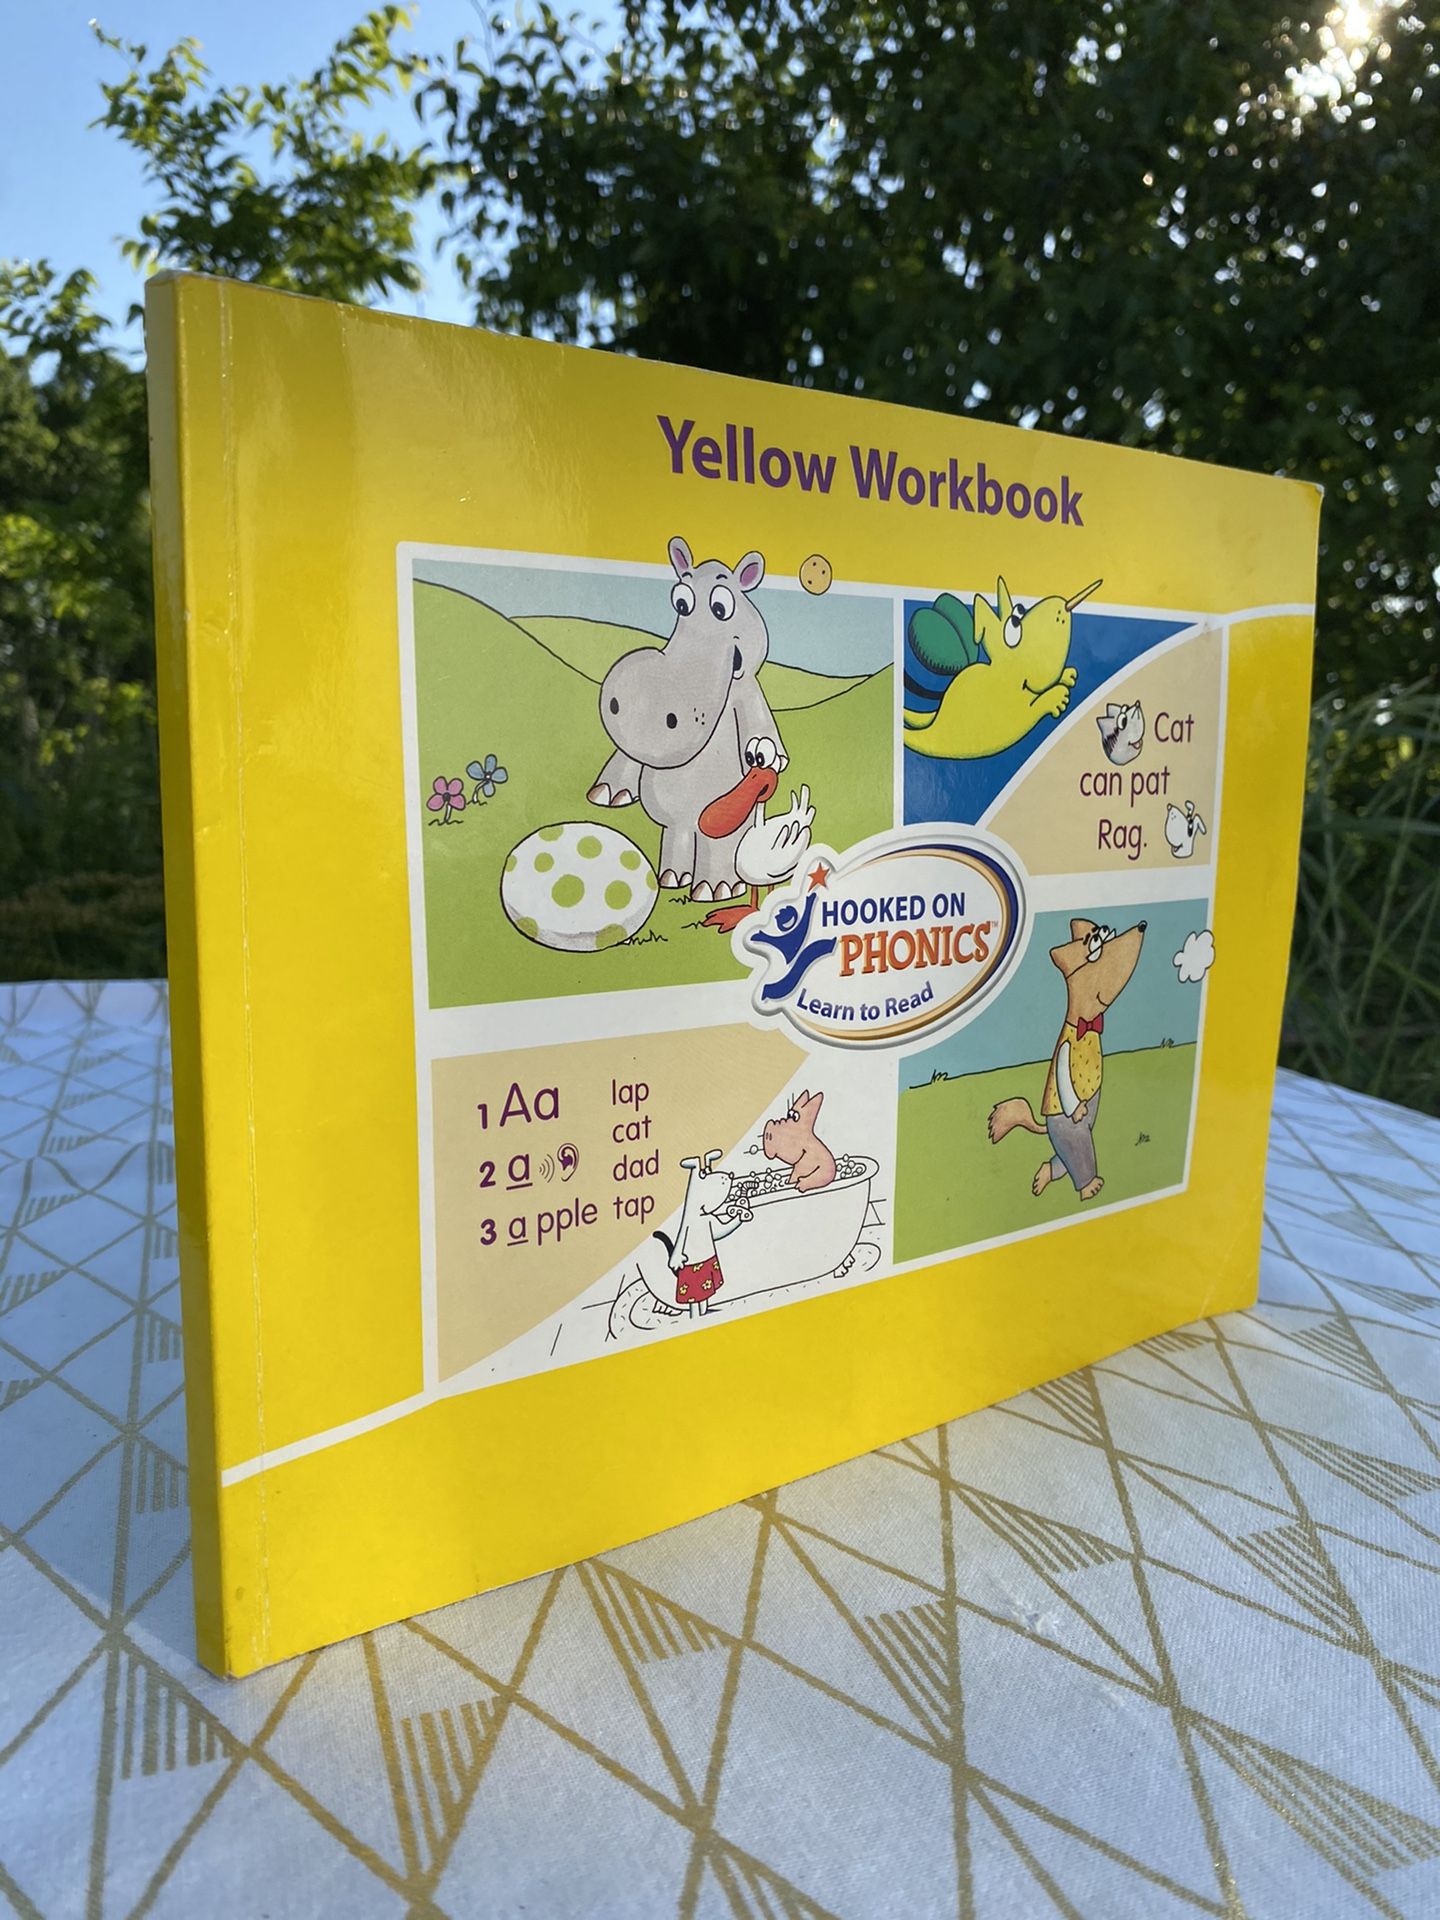 Hooked on Phonics, Level 1: Learn to Read / Yellow Workbook